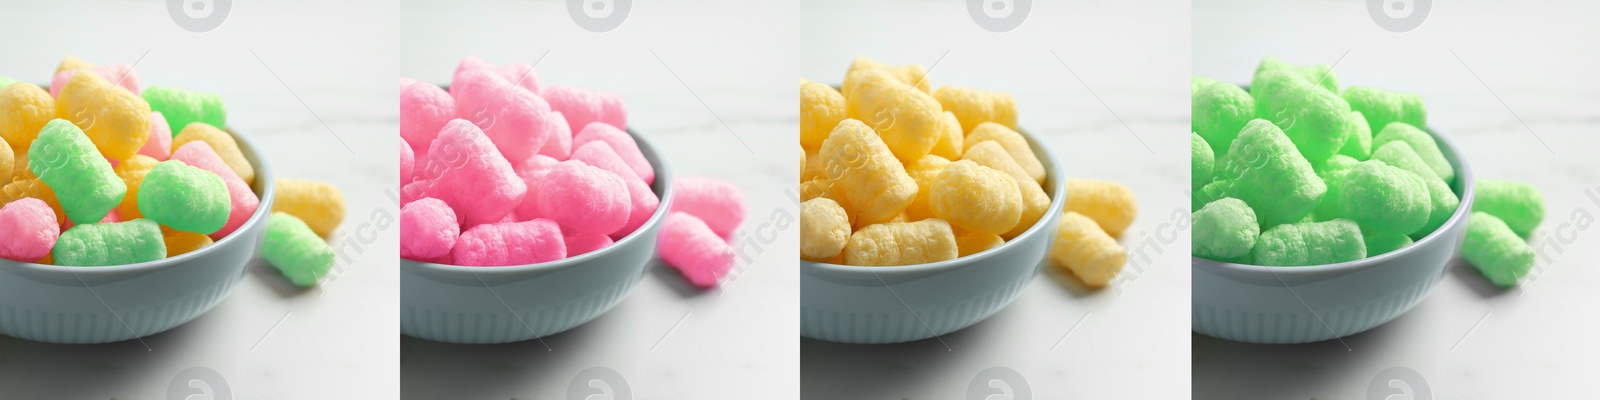 Image of Collage of bowls with colorful corn puffs on white background